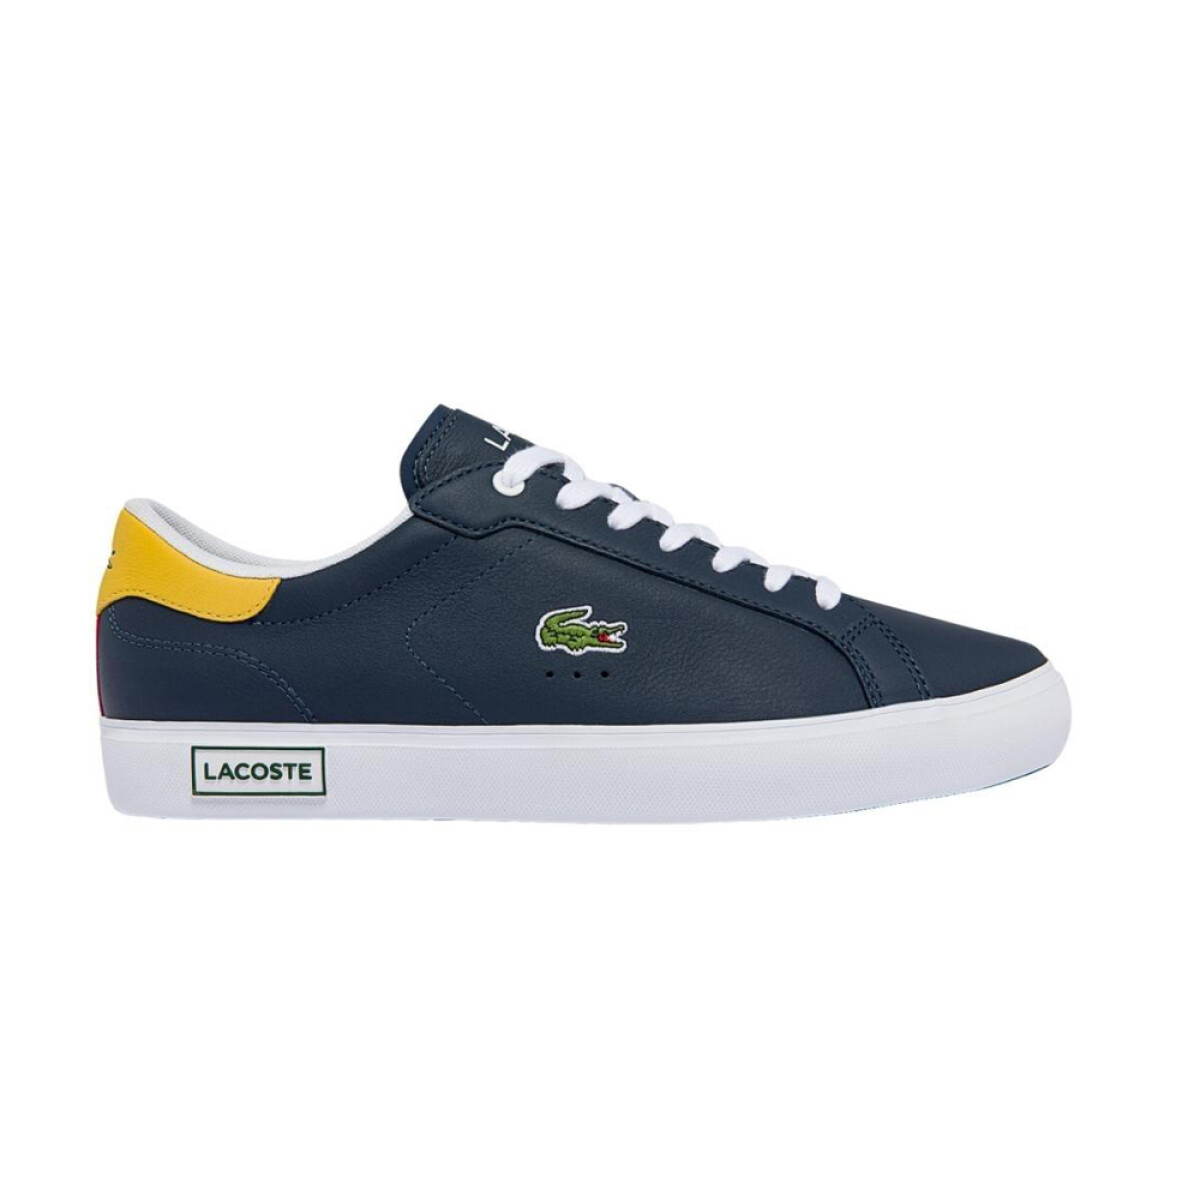 LACOSTE POWERCOURT LEATHER ACCENT - 2M3 